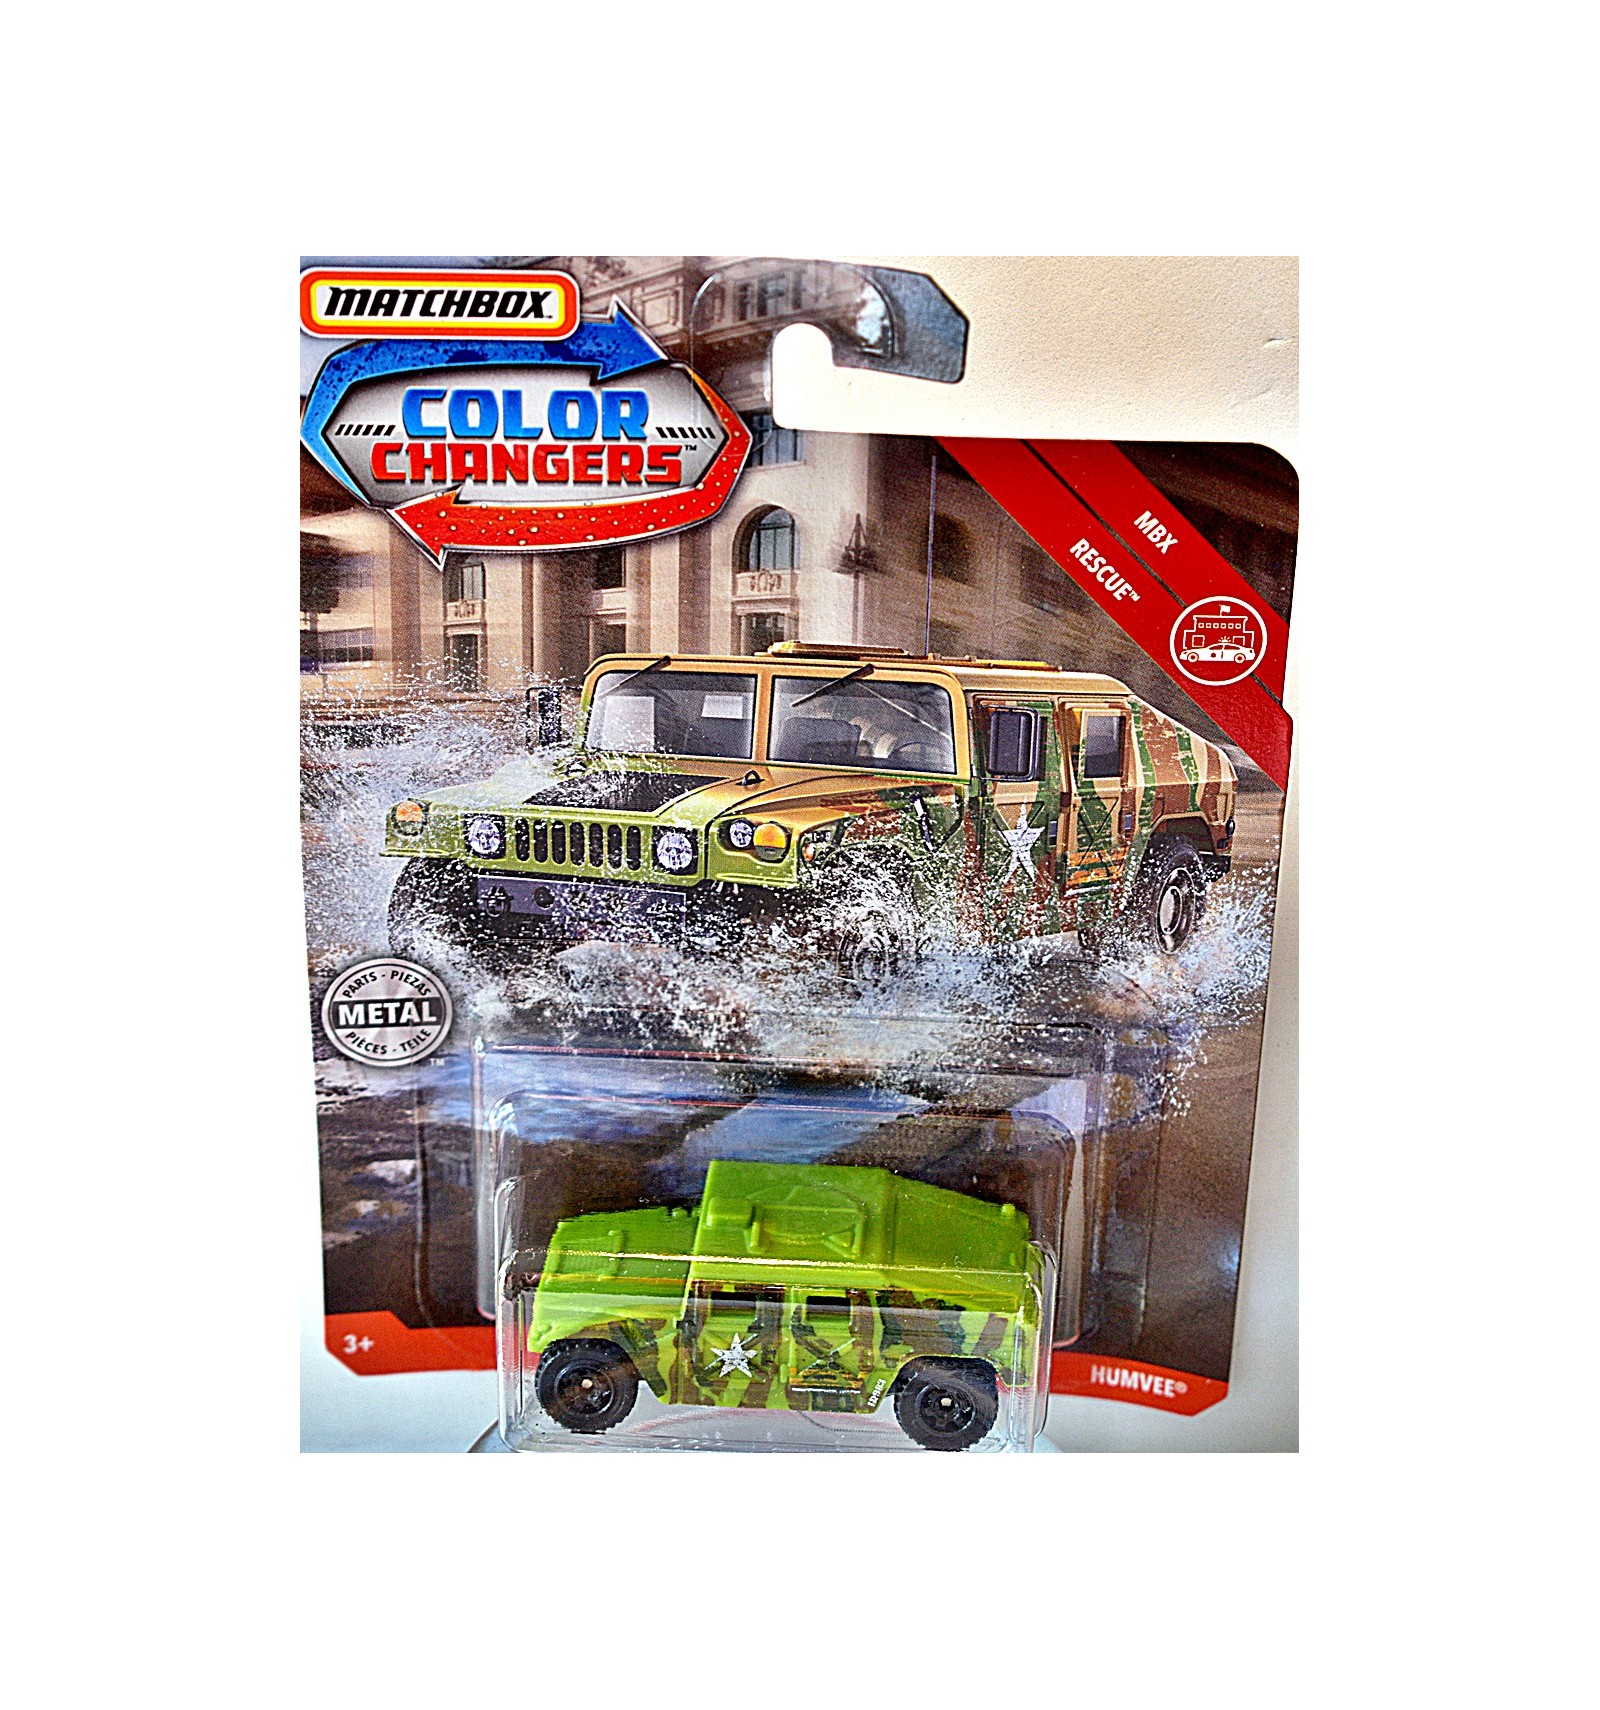 Aw12 Matchbox Color Changers MBX Rescue Hazard Military Humvee Diecast Vehicle 